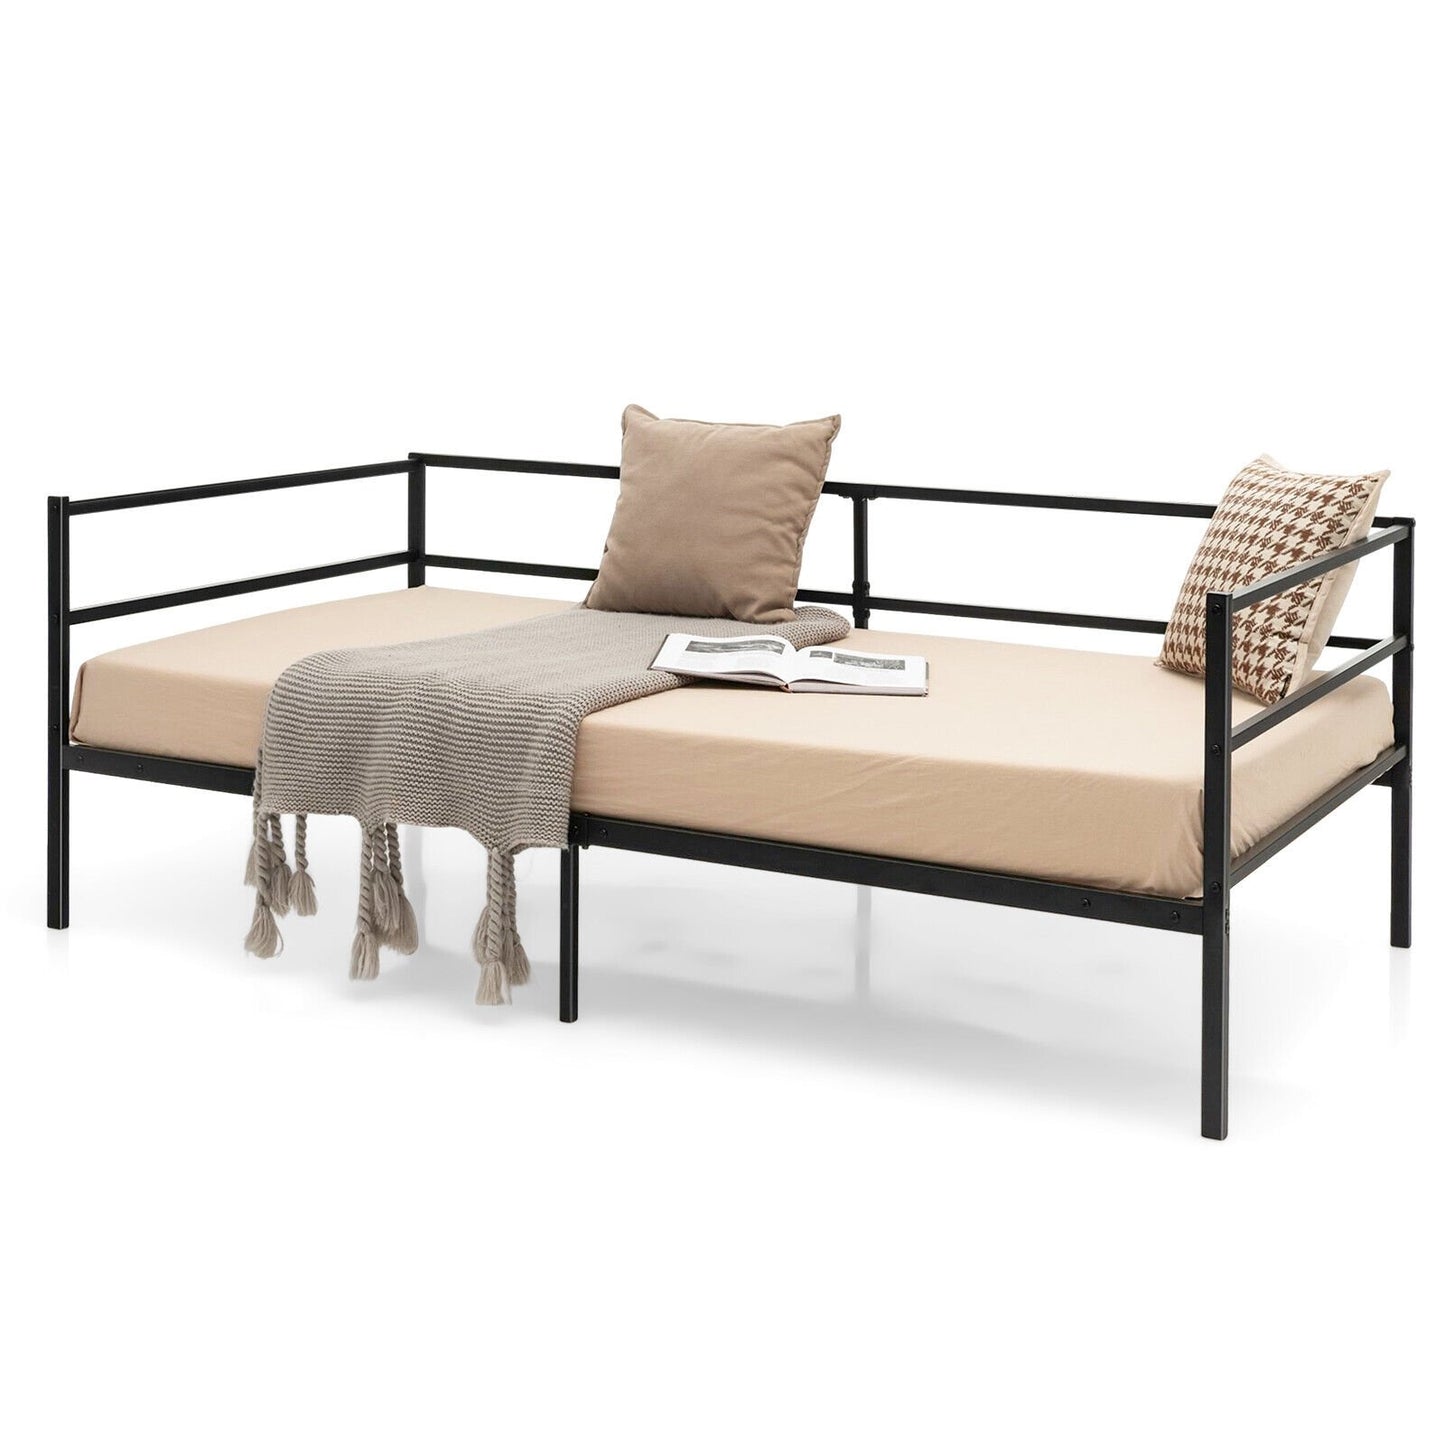 Twin Size Metal Daybed Frame with Metal Slat Support and 3-Sided Guardrails, Black